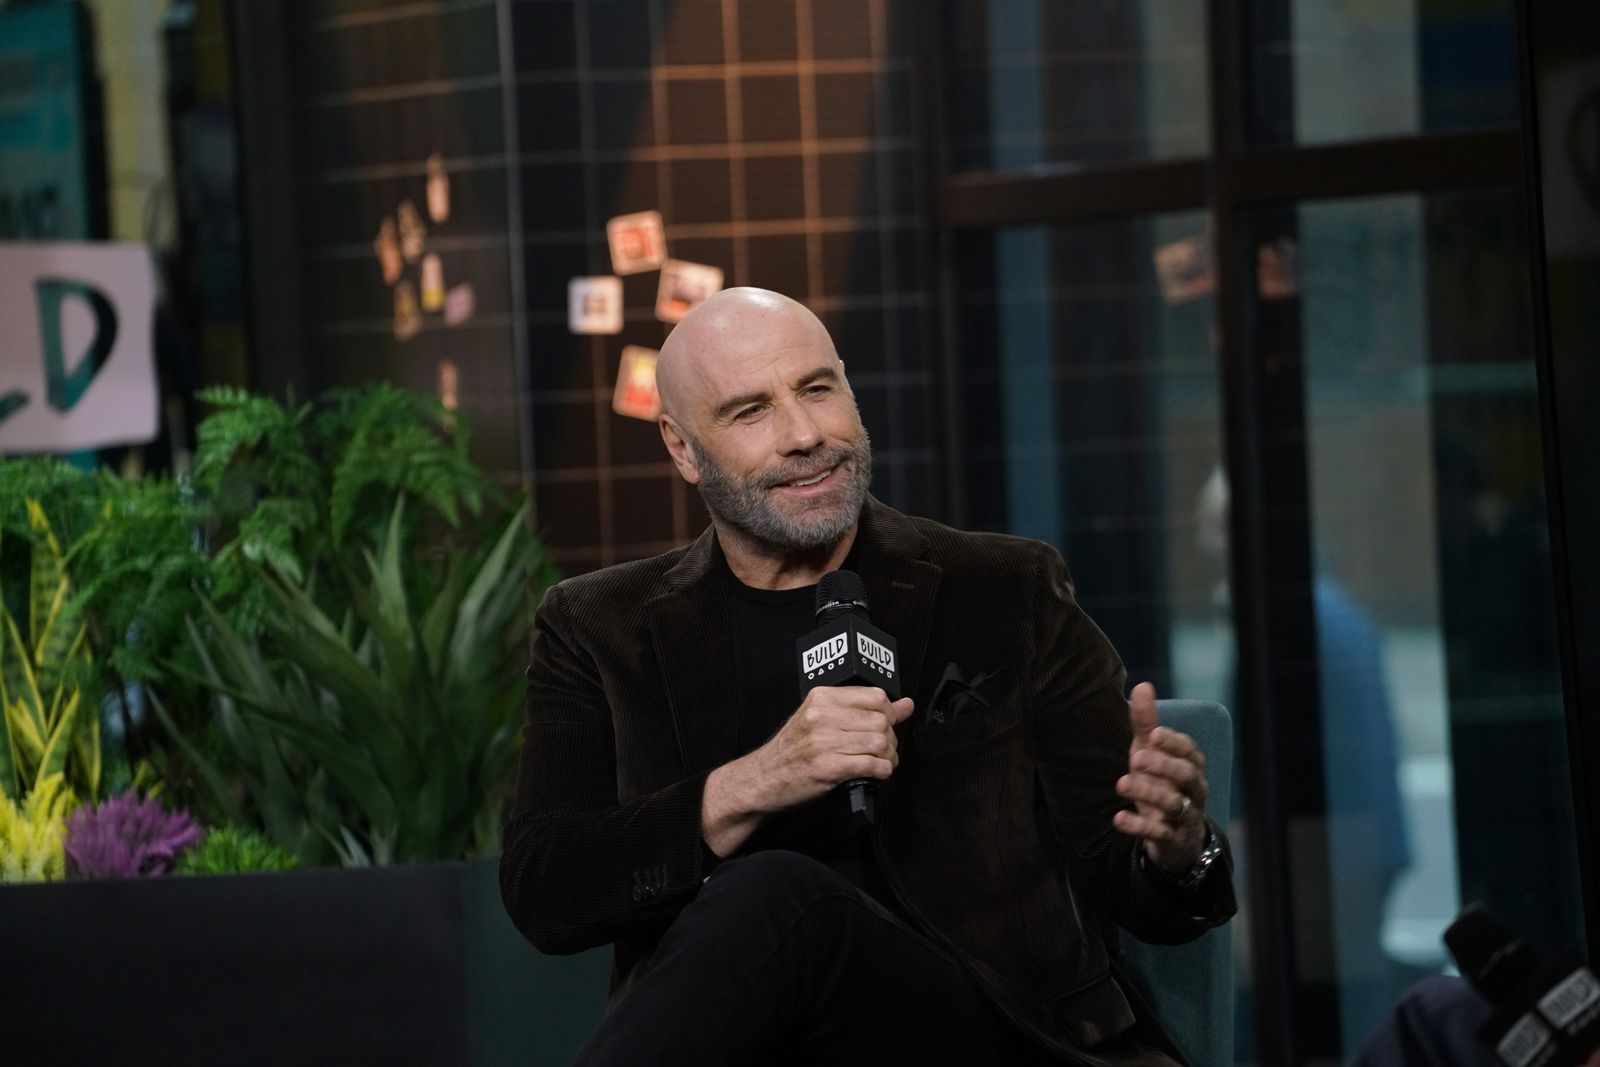 John Travolta at Build Series to discuss his role in the film "The Fanatic" at Build Studio on November 25, 2019 | Photo: Getty Images